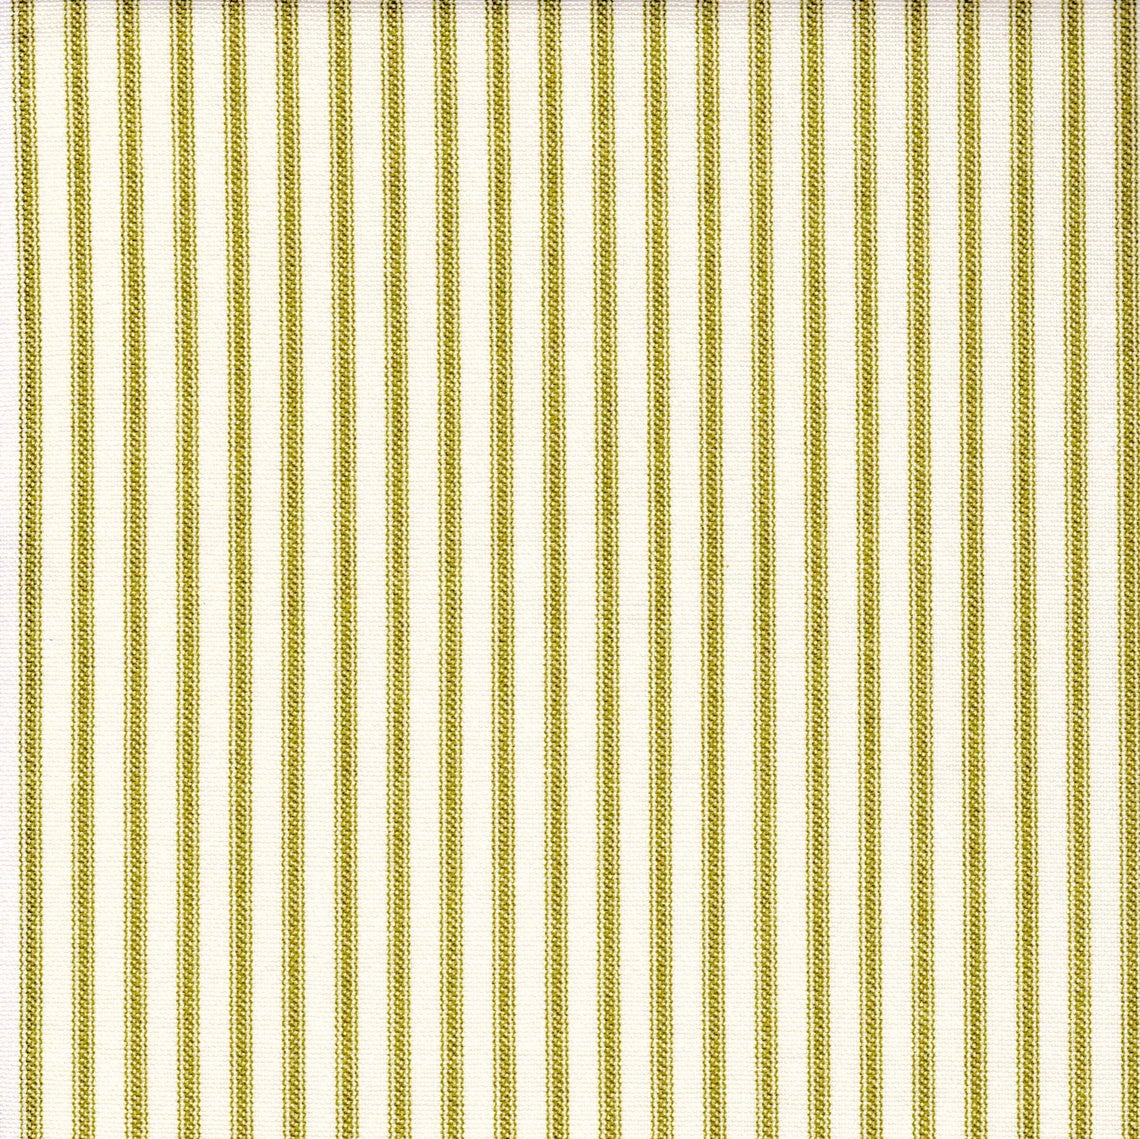 tailored valance in farmhouse meadow green ticking stripe on cream